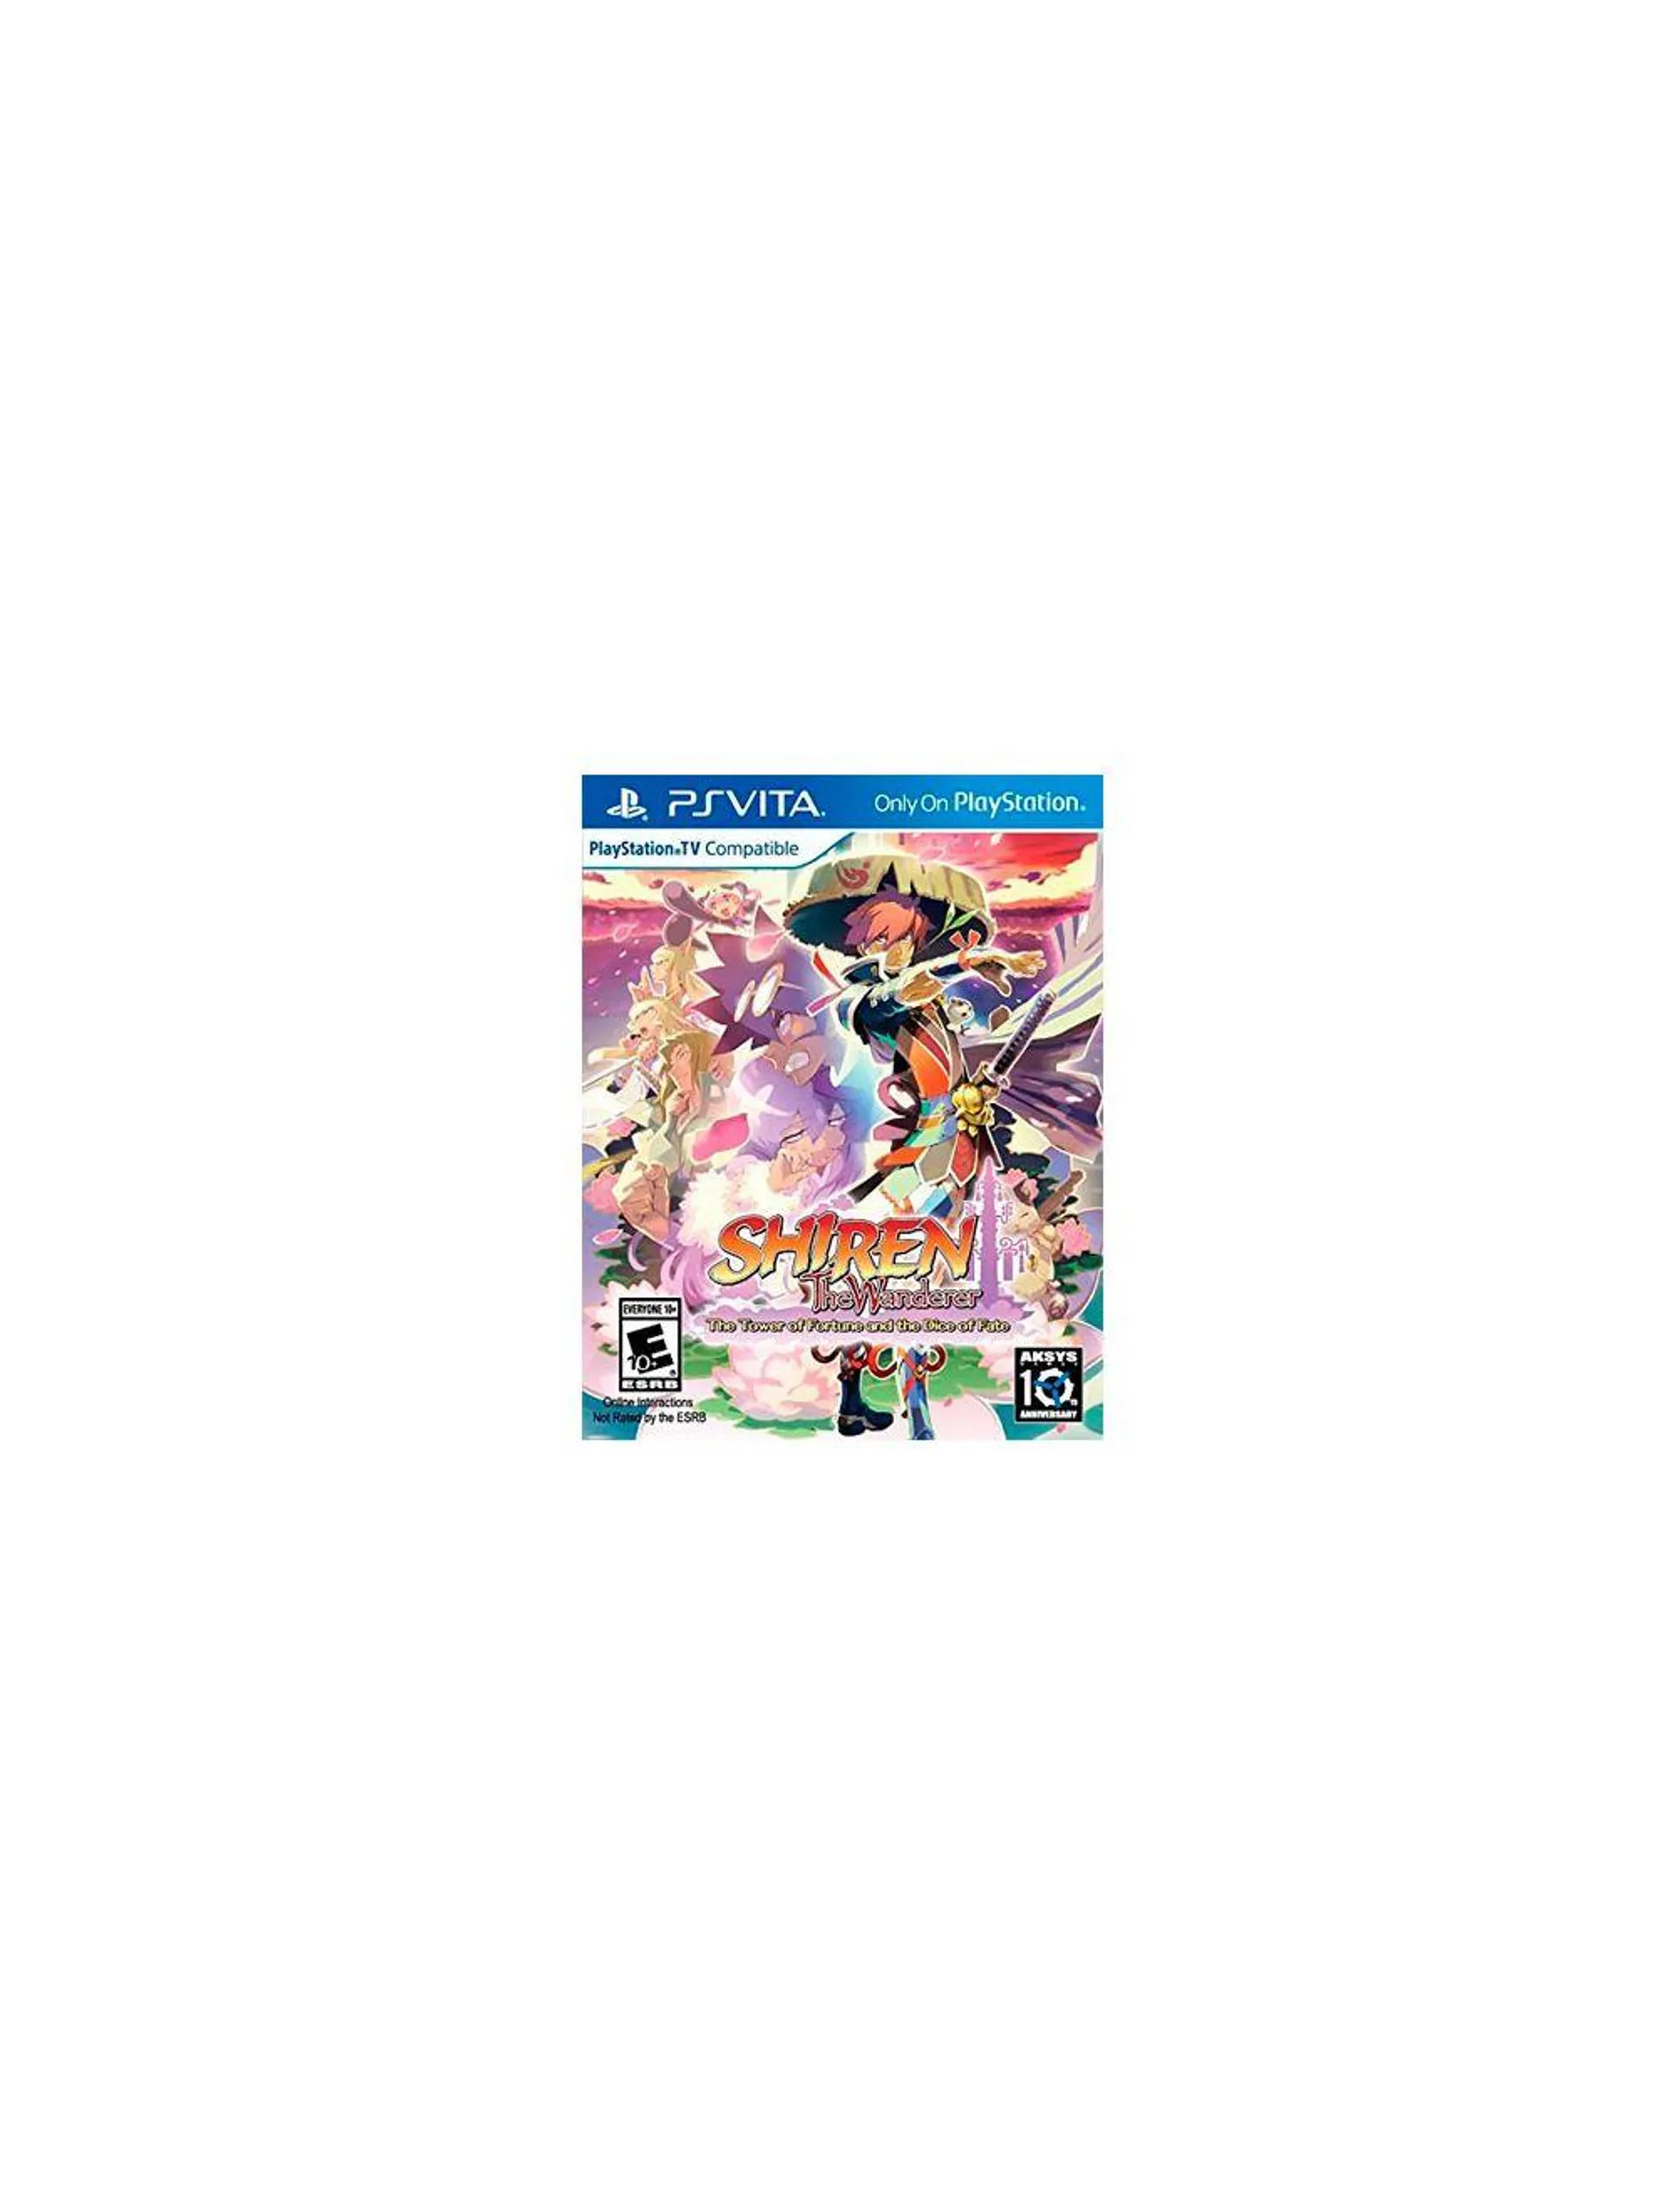 Shiren the Wanderer: The Tower of Fortune and the Dice of Fate PS Vita